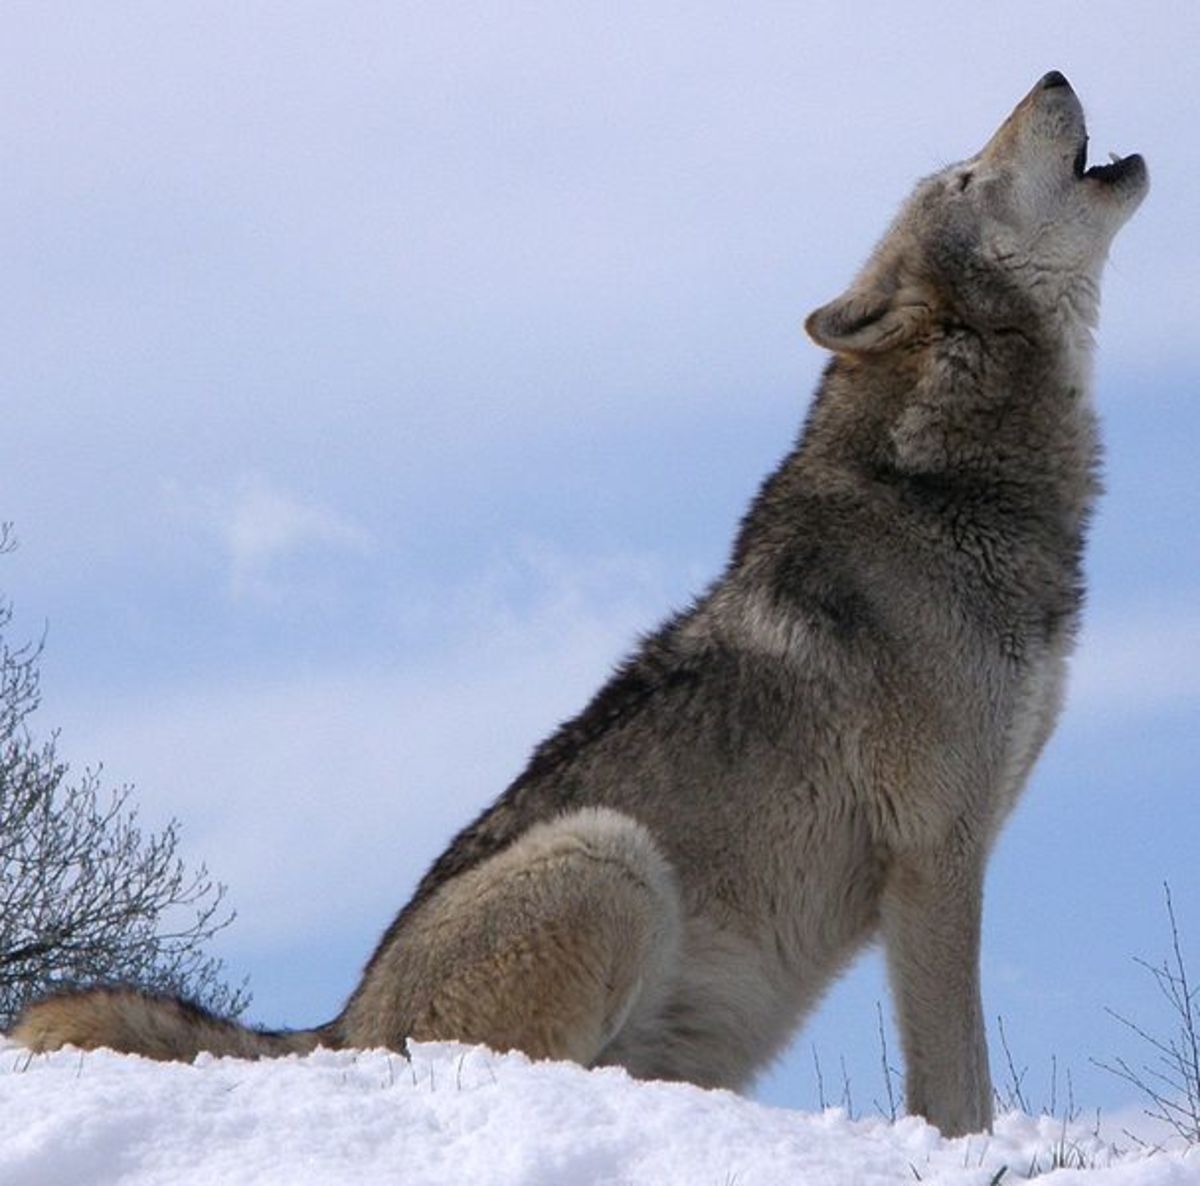 Rewilding would mean a return of the wolf throughout much of its original range.